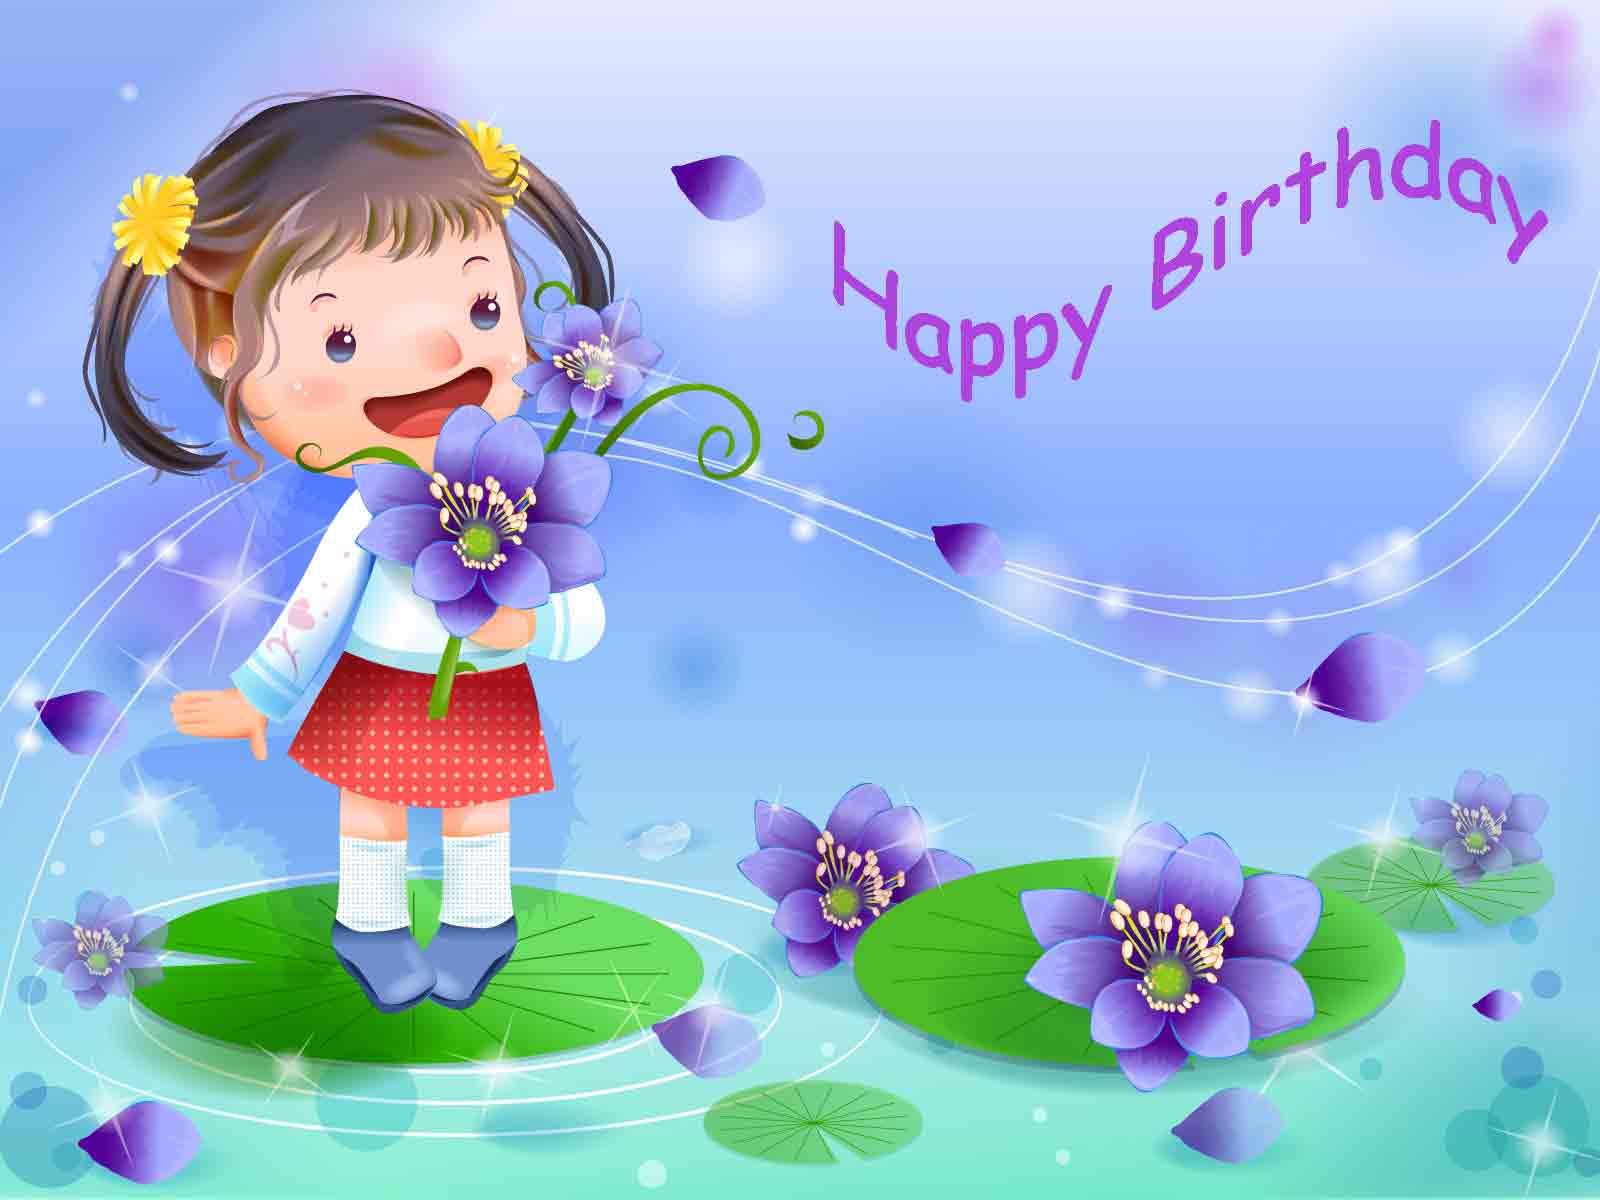 Wallpaper For > Cute Birthday Wishes Wallpaper